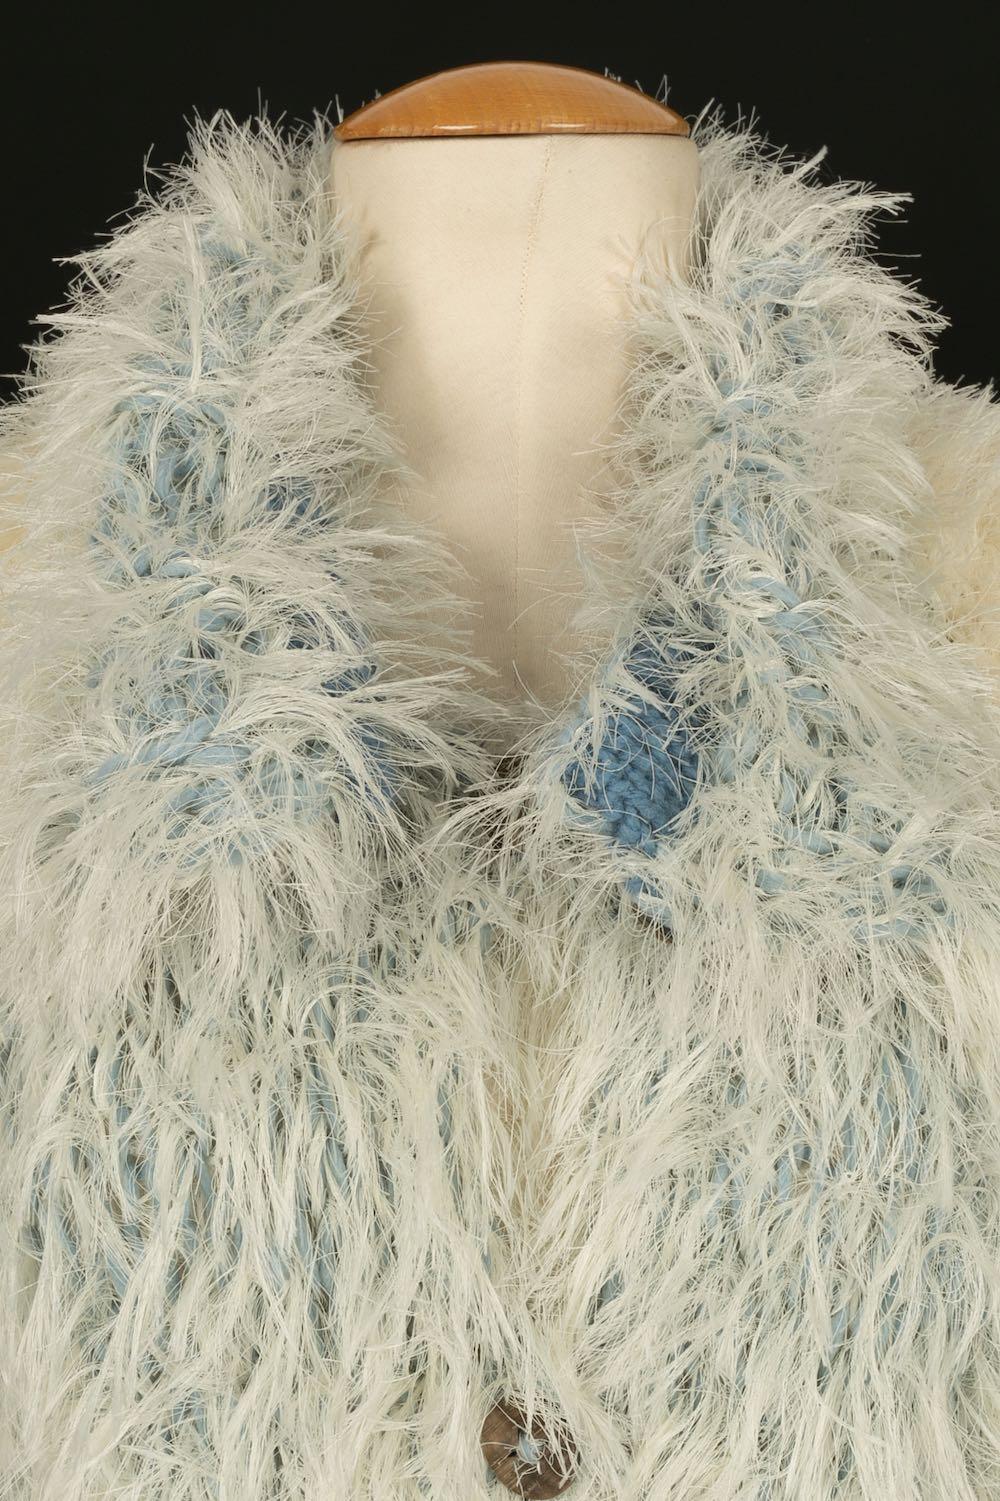 John Galliano Coat with Wool Mix in Blue Tones, Fall 2005 For Sale 1